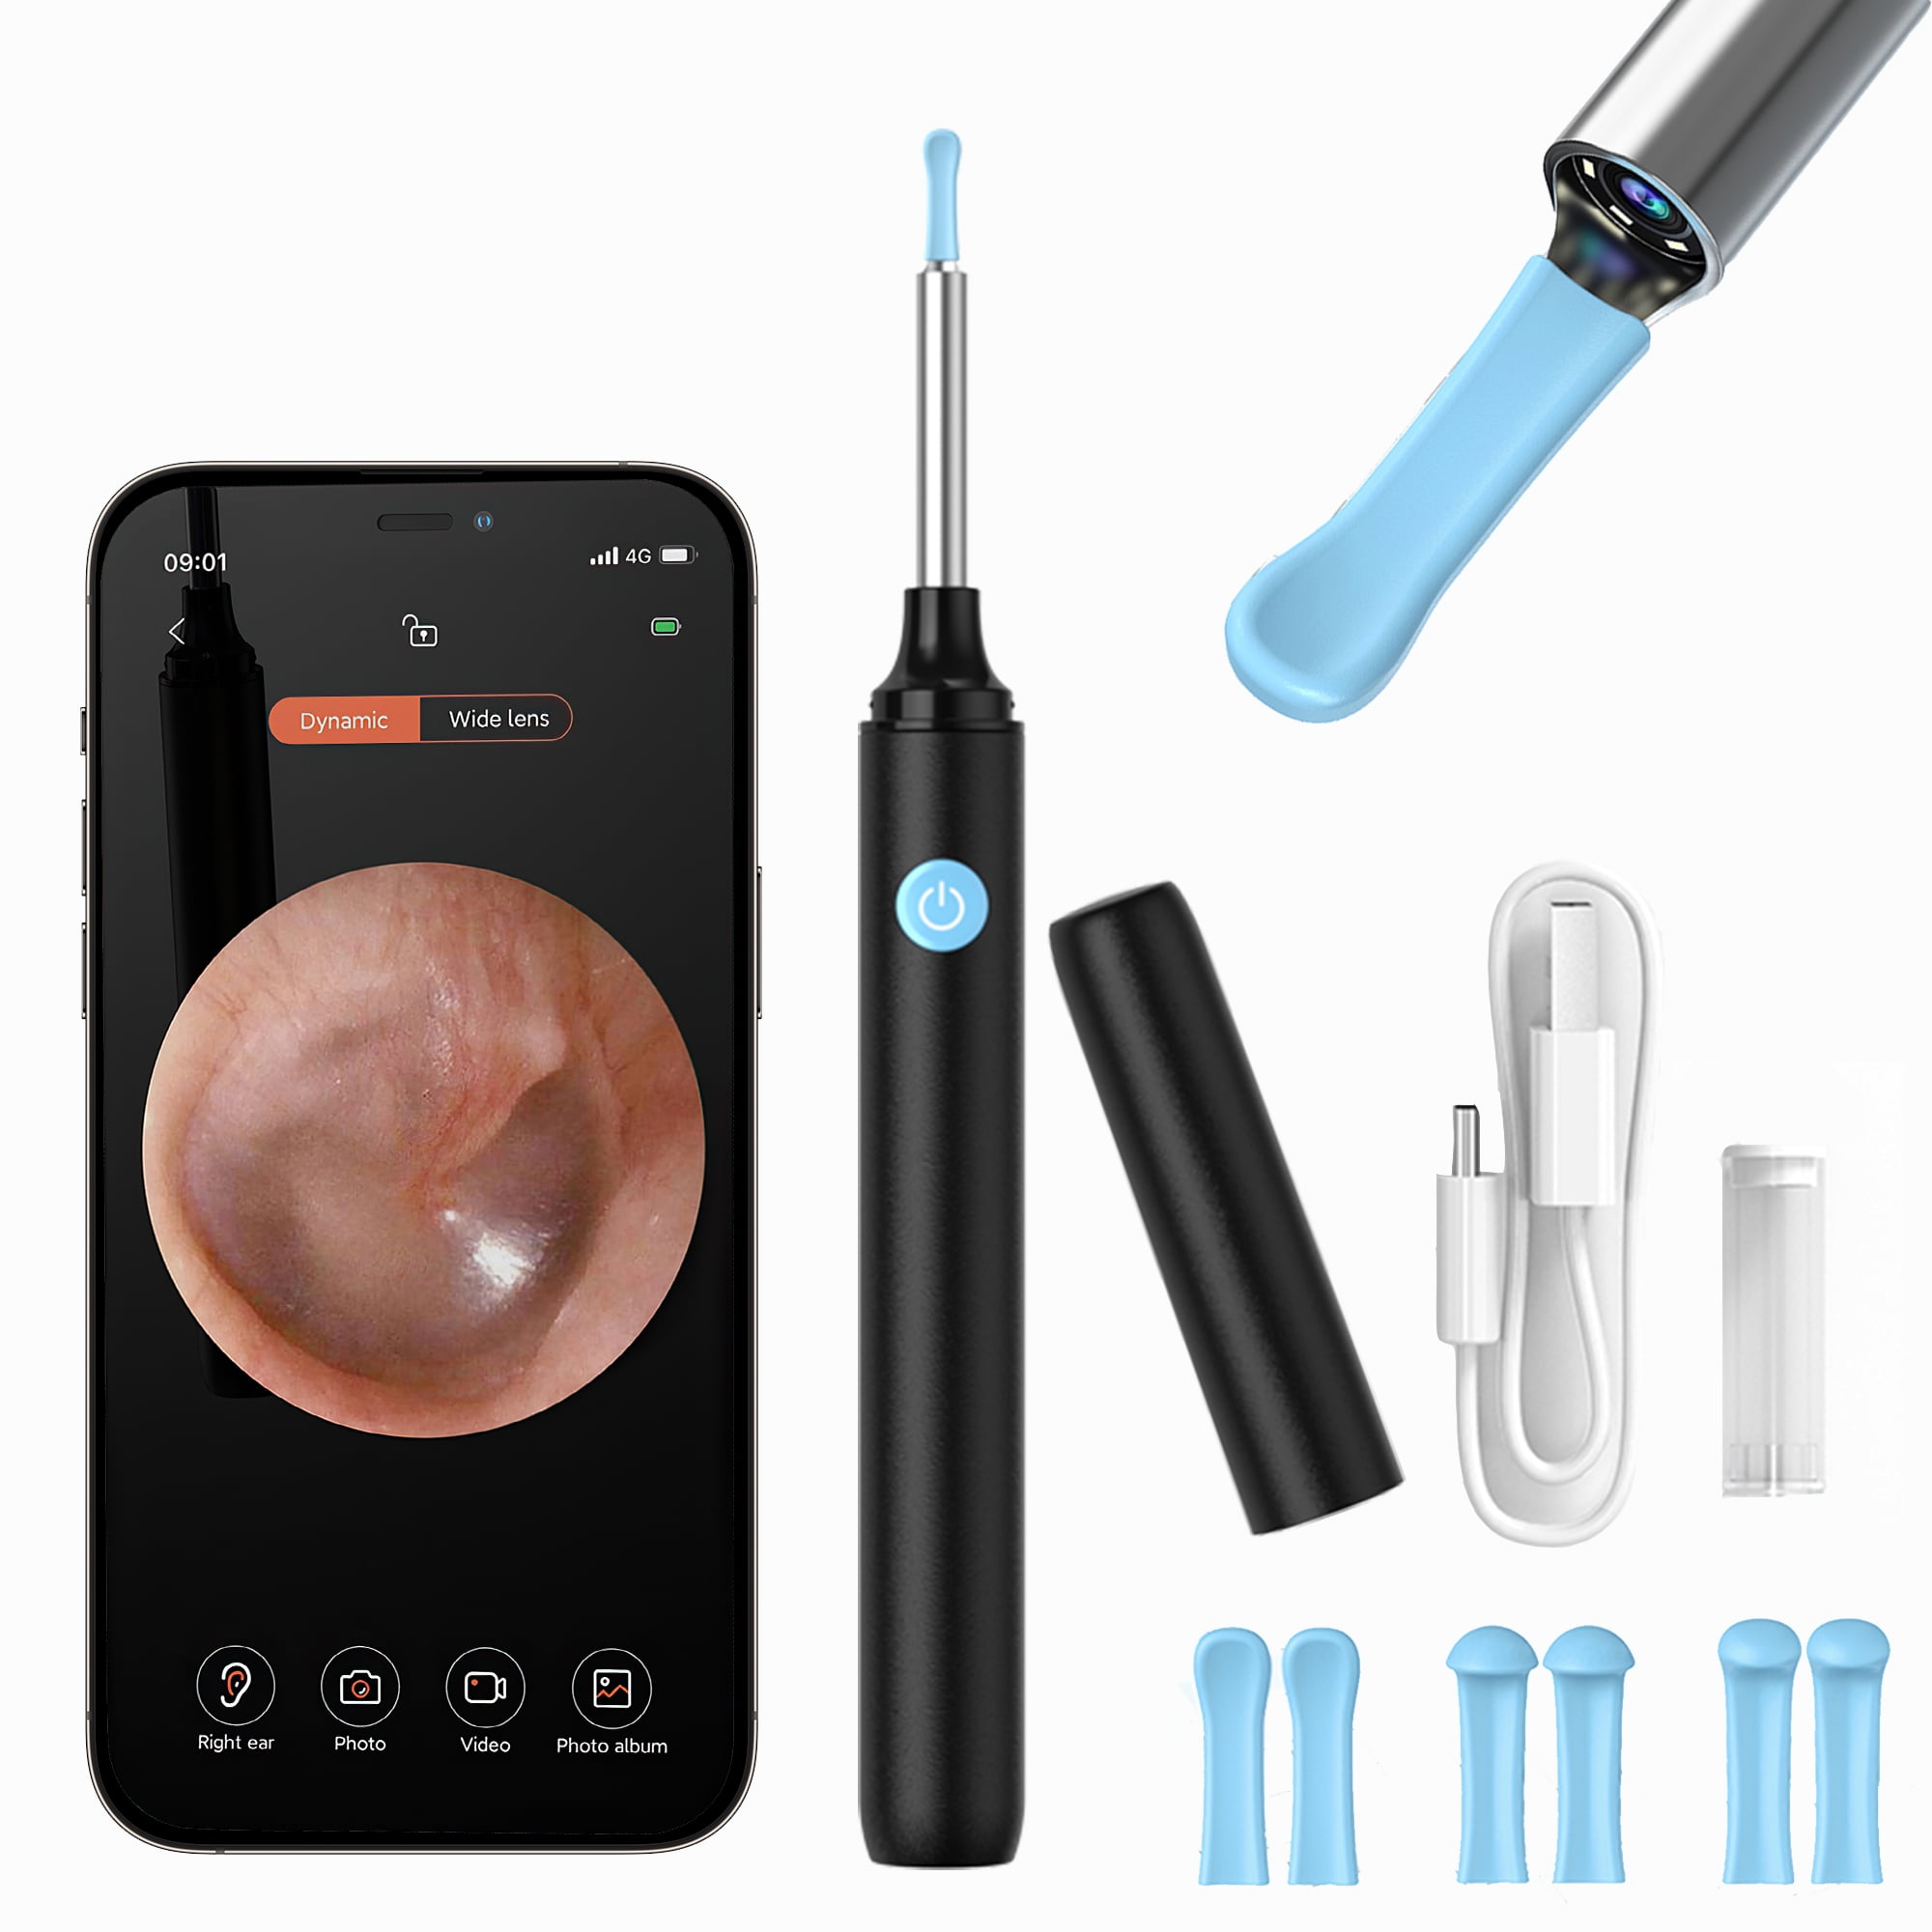 Kekoy Ear Wax Removal Kit, Ear Cleaner with Camera, 5 Megapixels